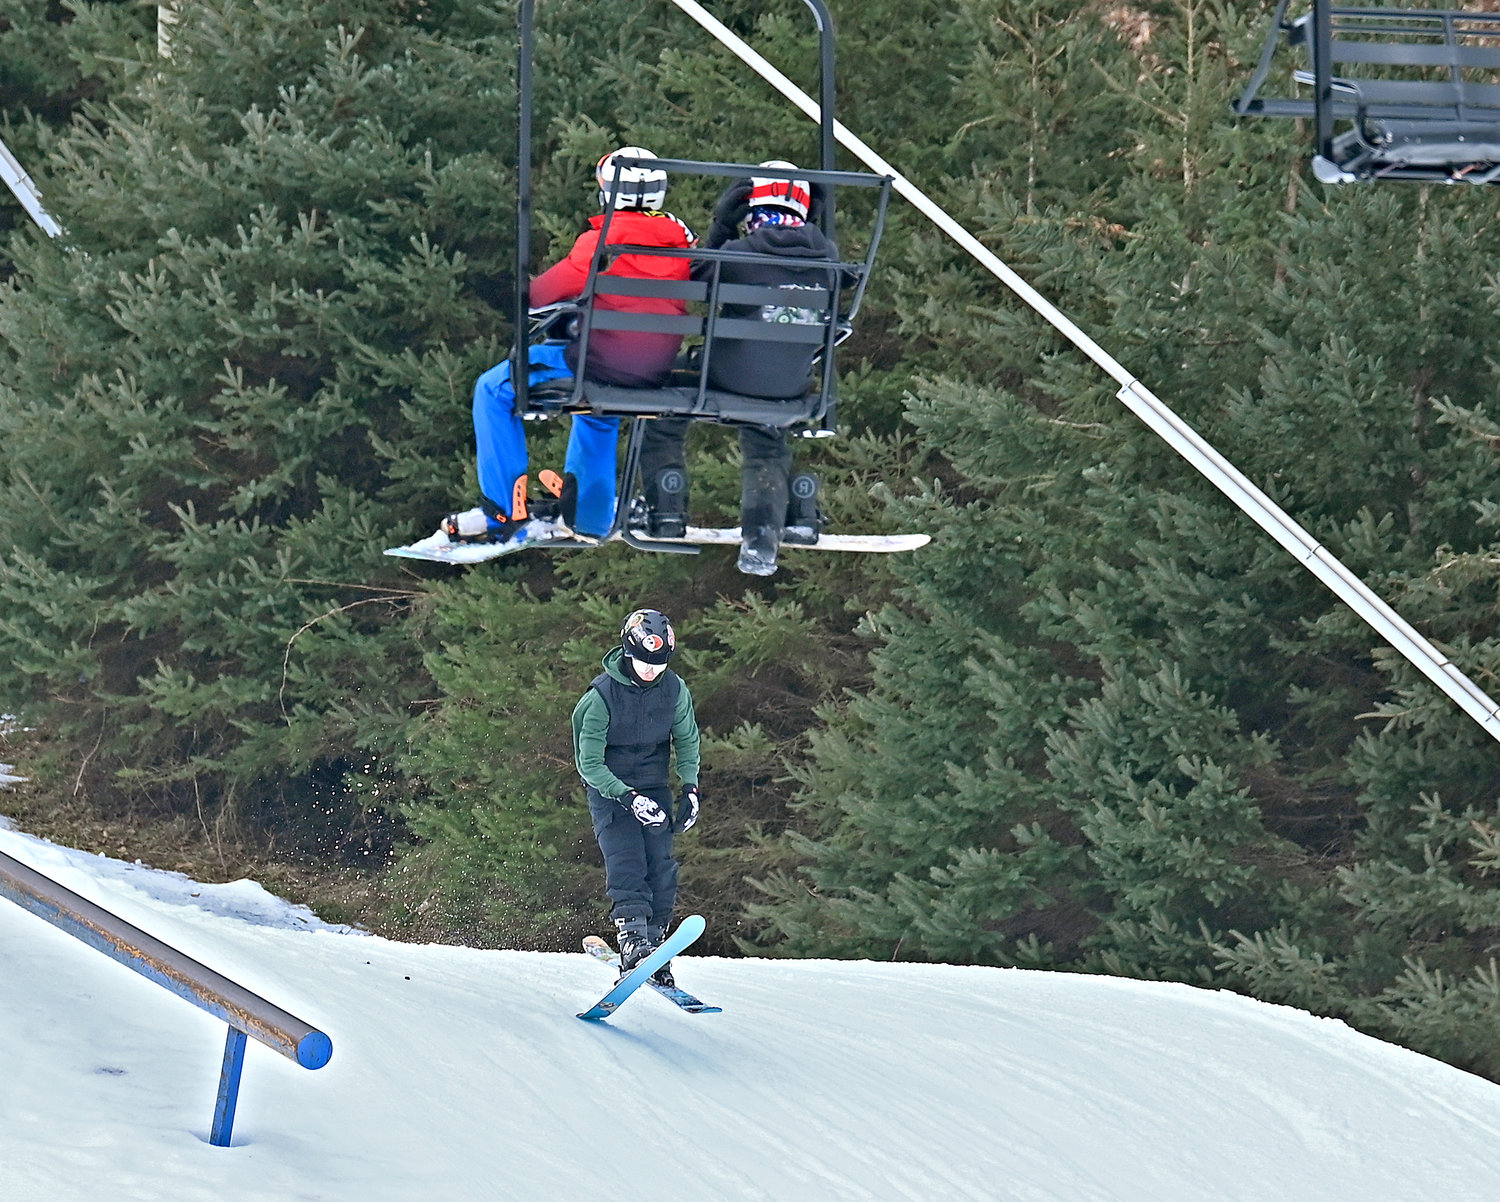 Skier at Woods Valley Ski Center with other skiers heading up the hill Monday, Feb. 20.